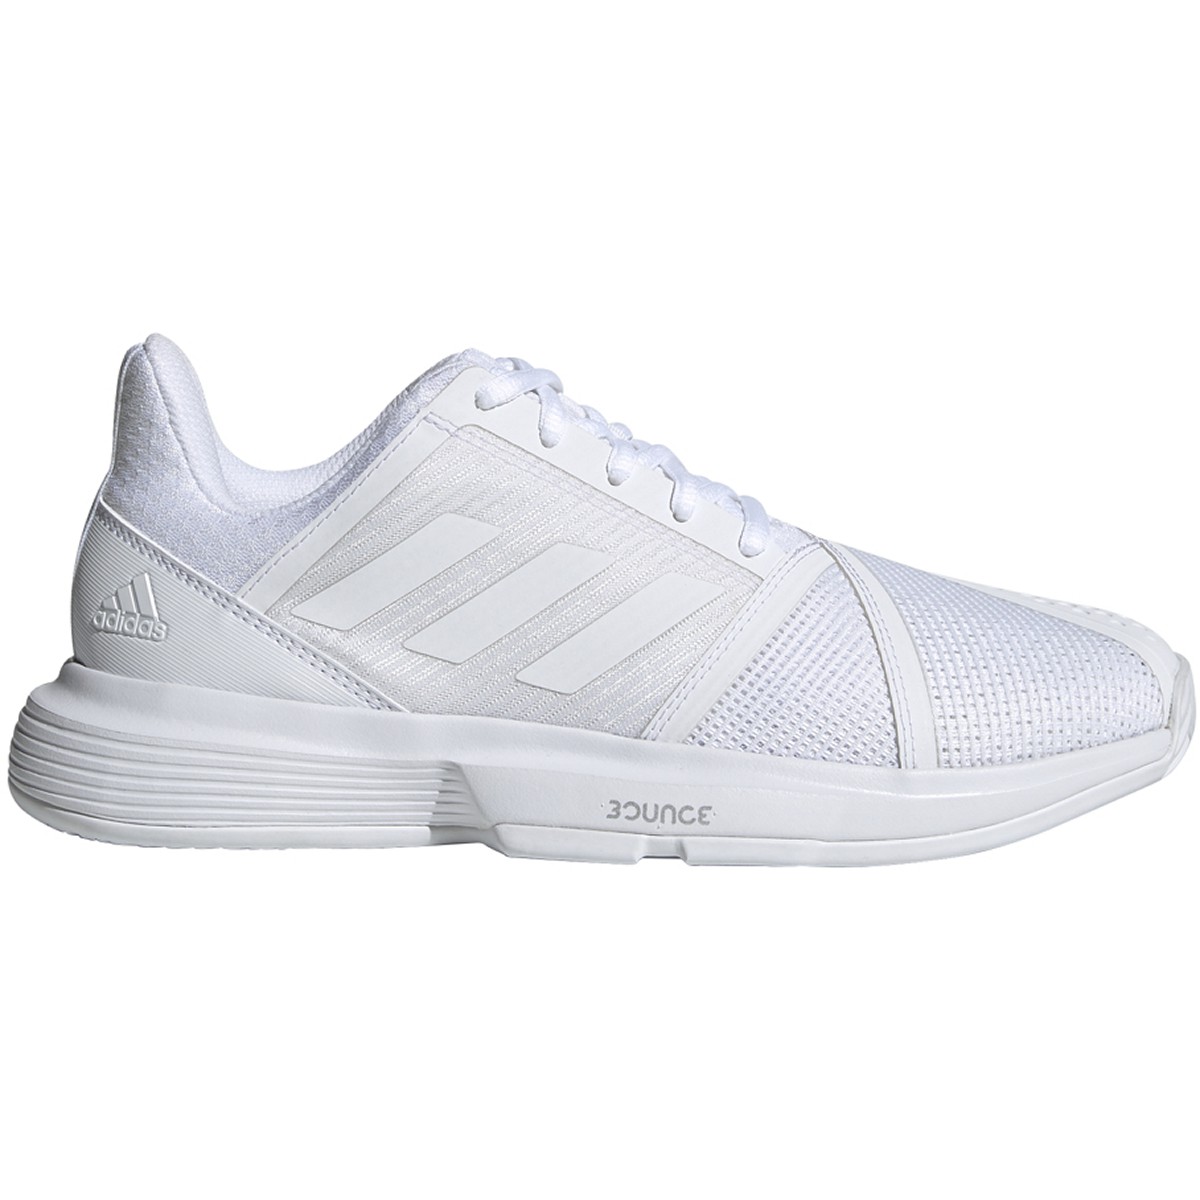 adidas courtjam bounce women's shoes